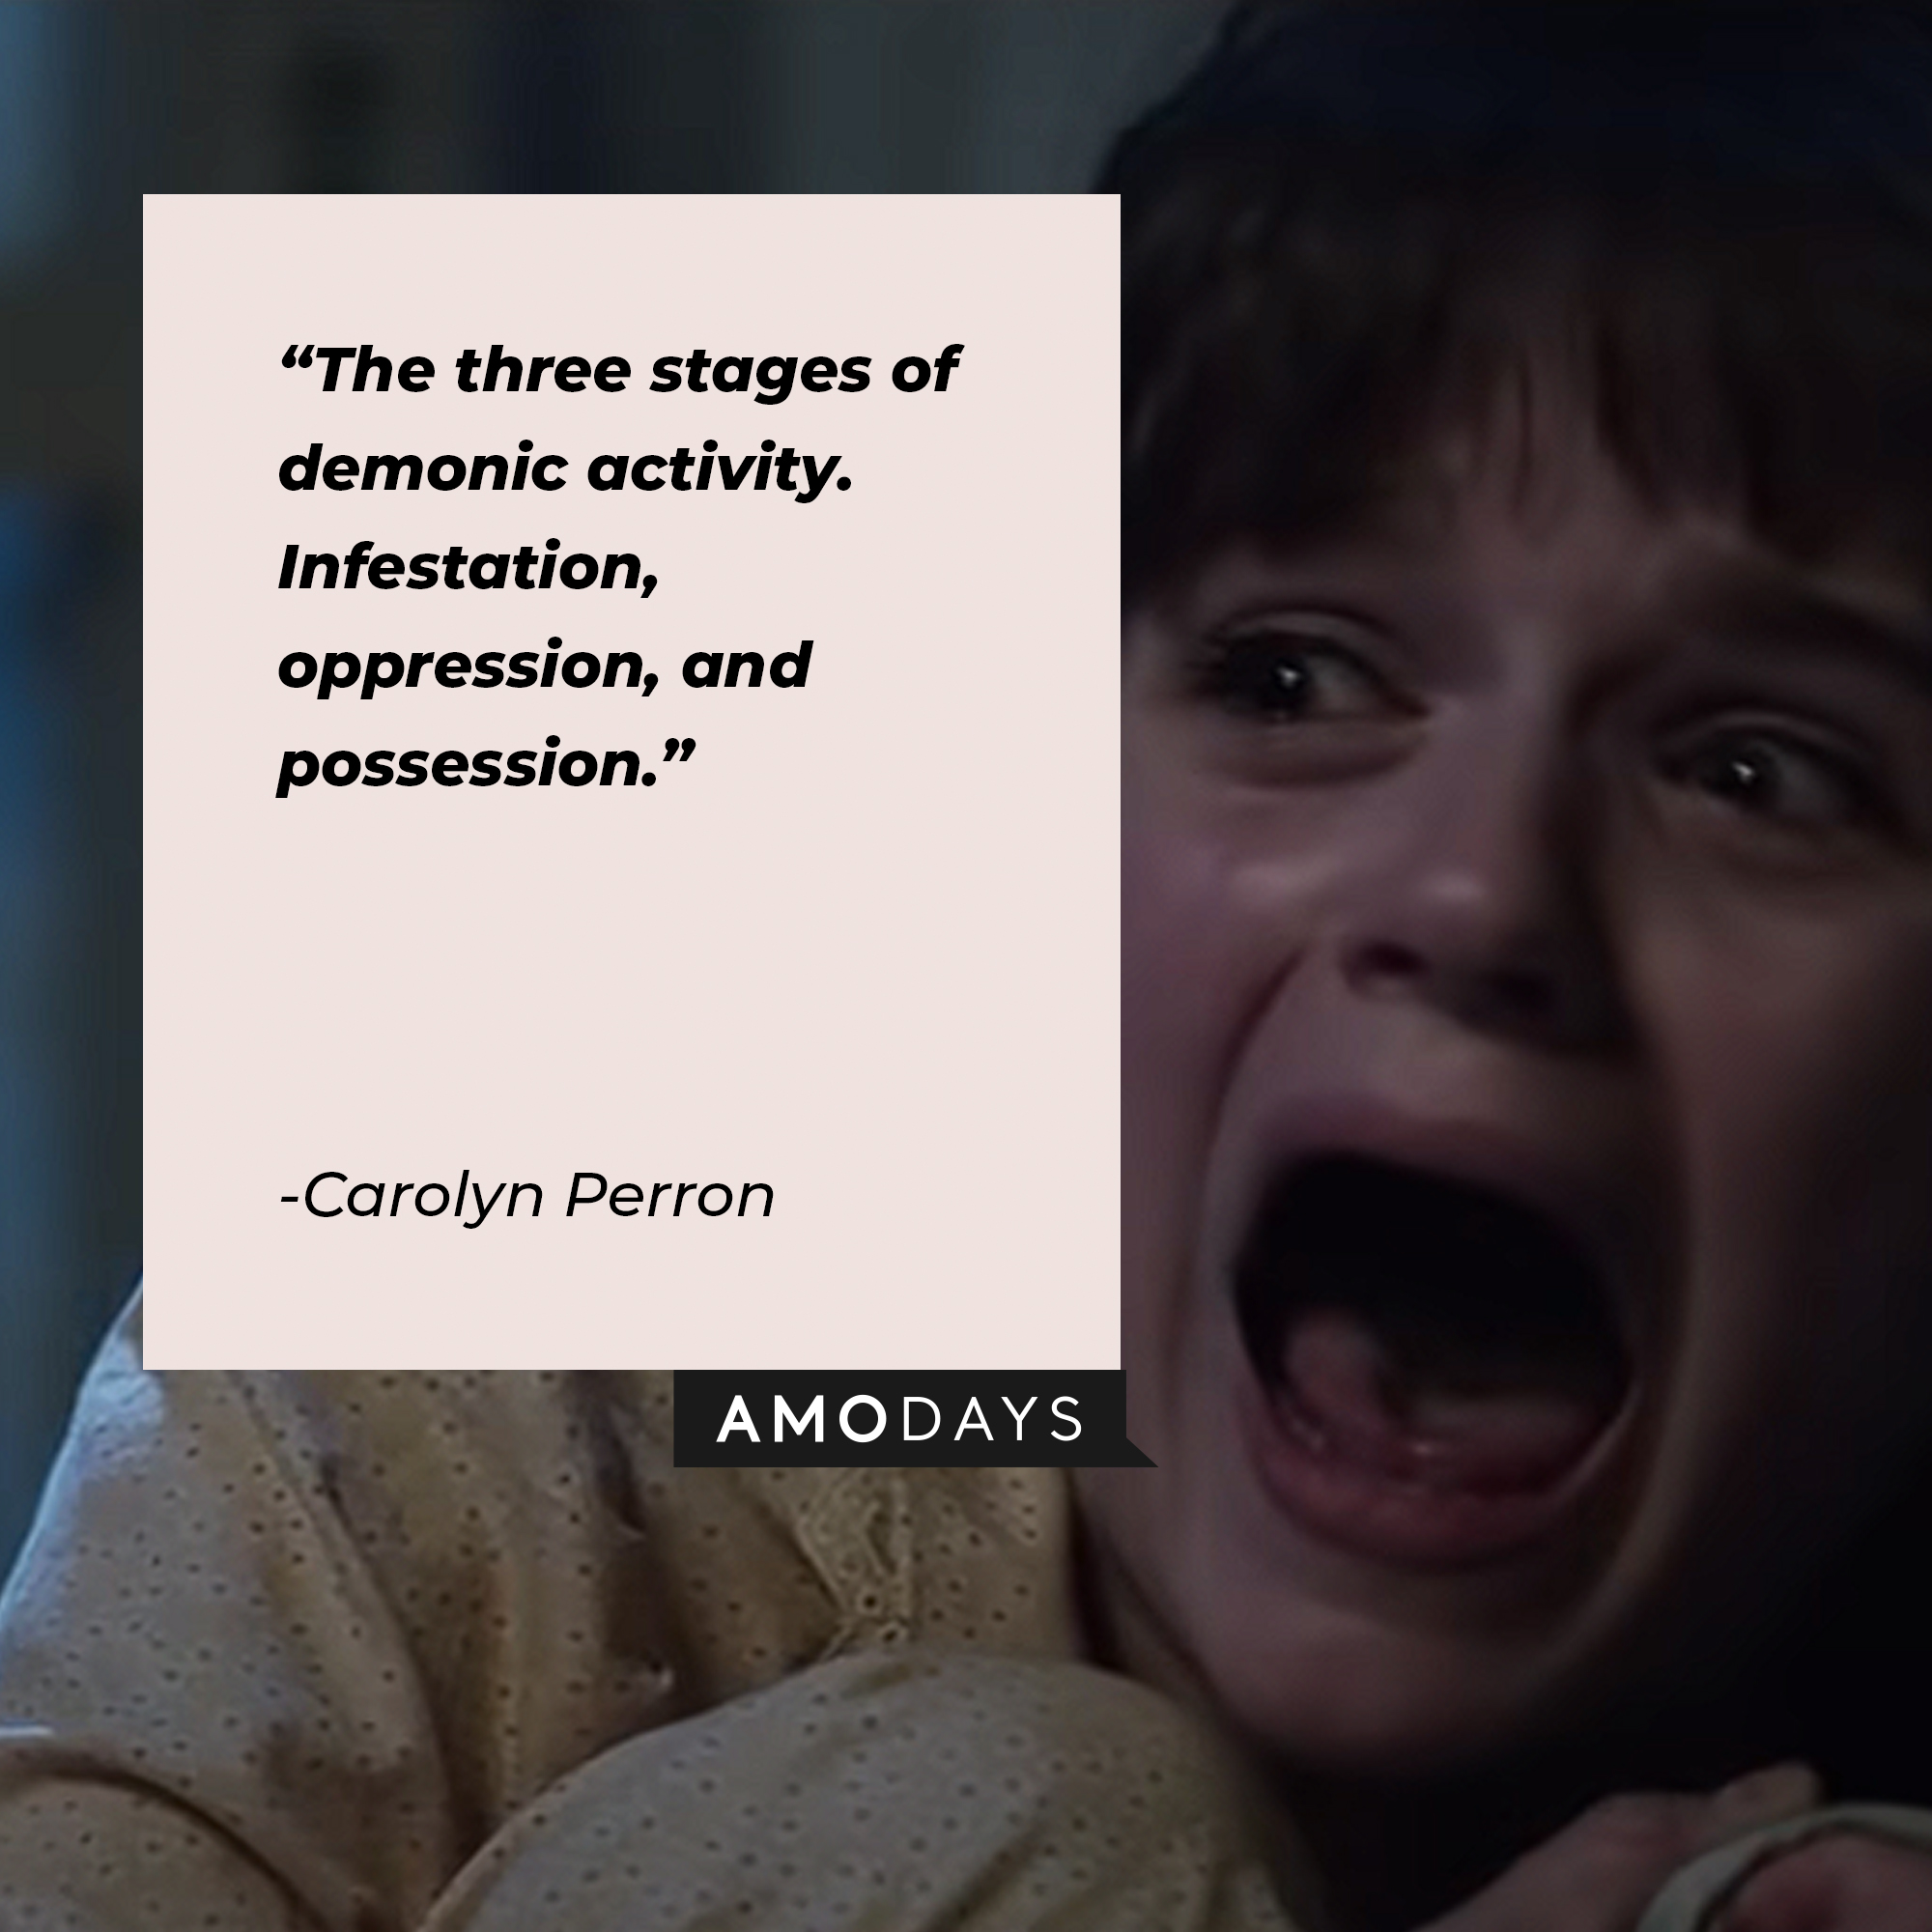 An image of a  character from “The Conjuring” with Carolyn Perron’s quote: “The three stages of demonic activity. Infestation, oppression, and possession.” | Source: youtube.com/WarnerBrosPictures